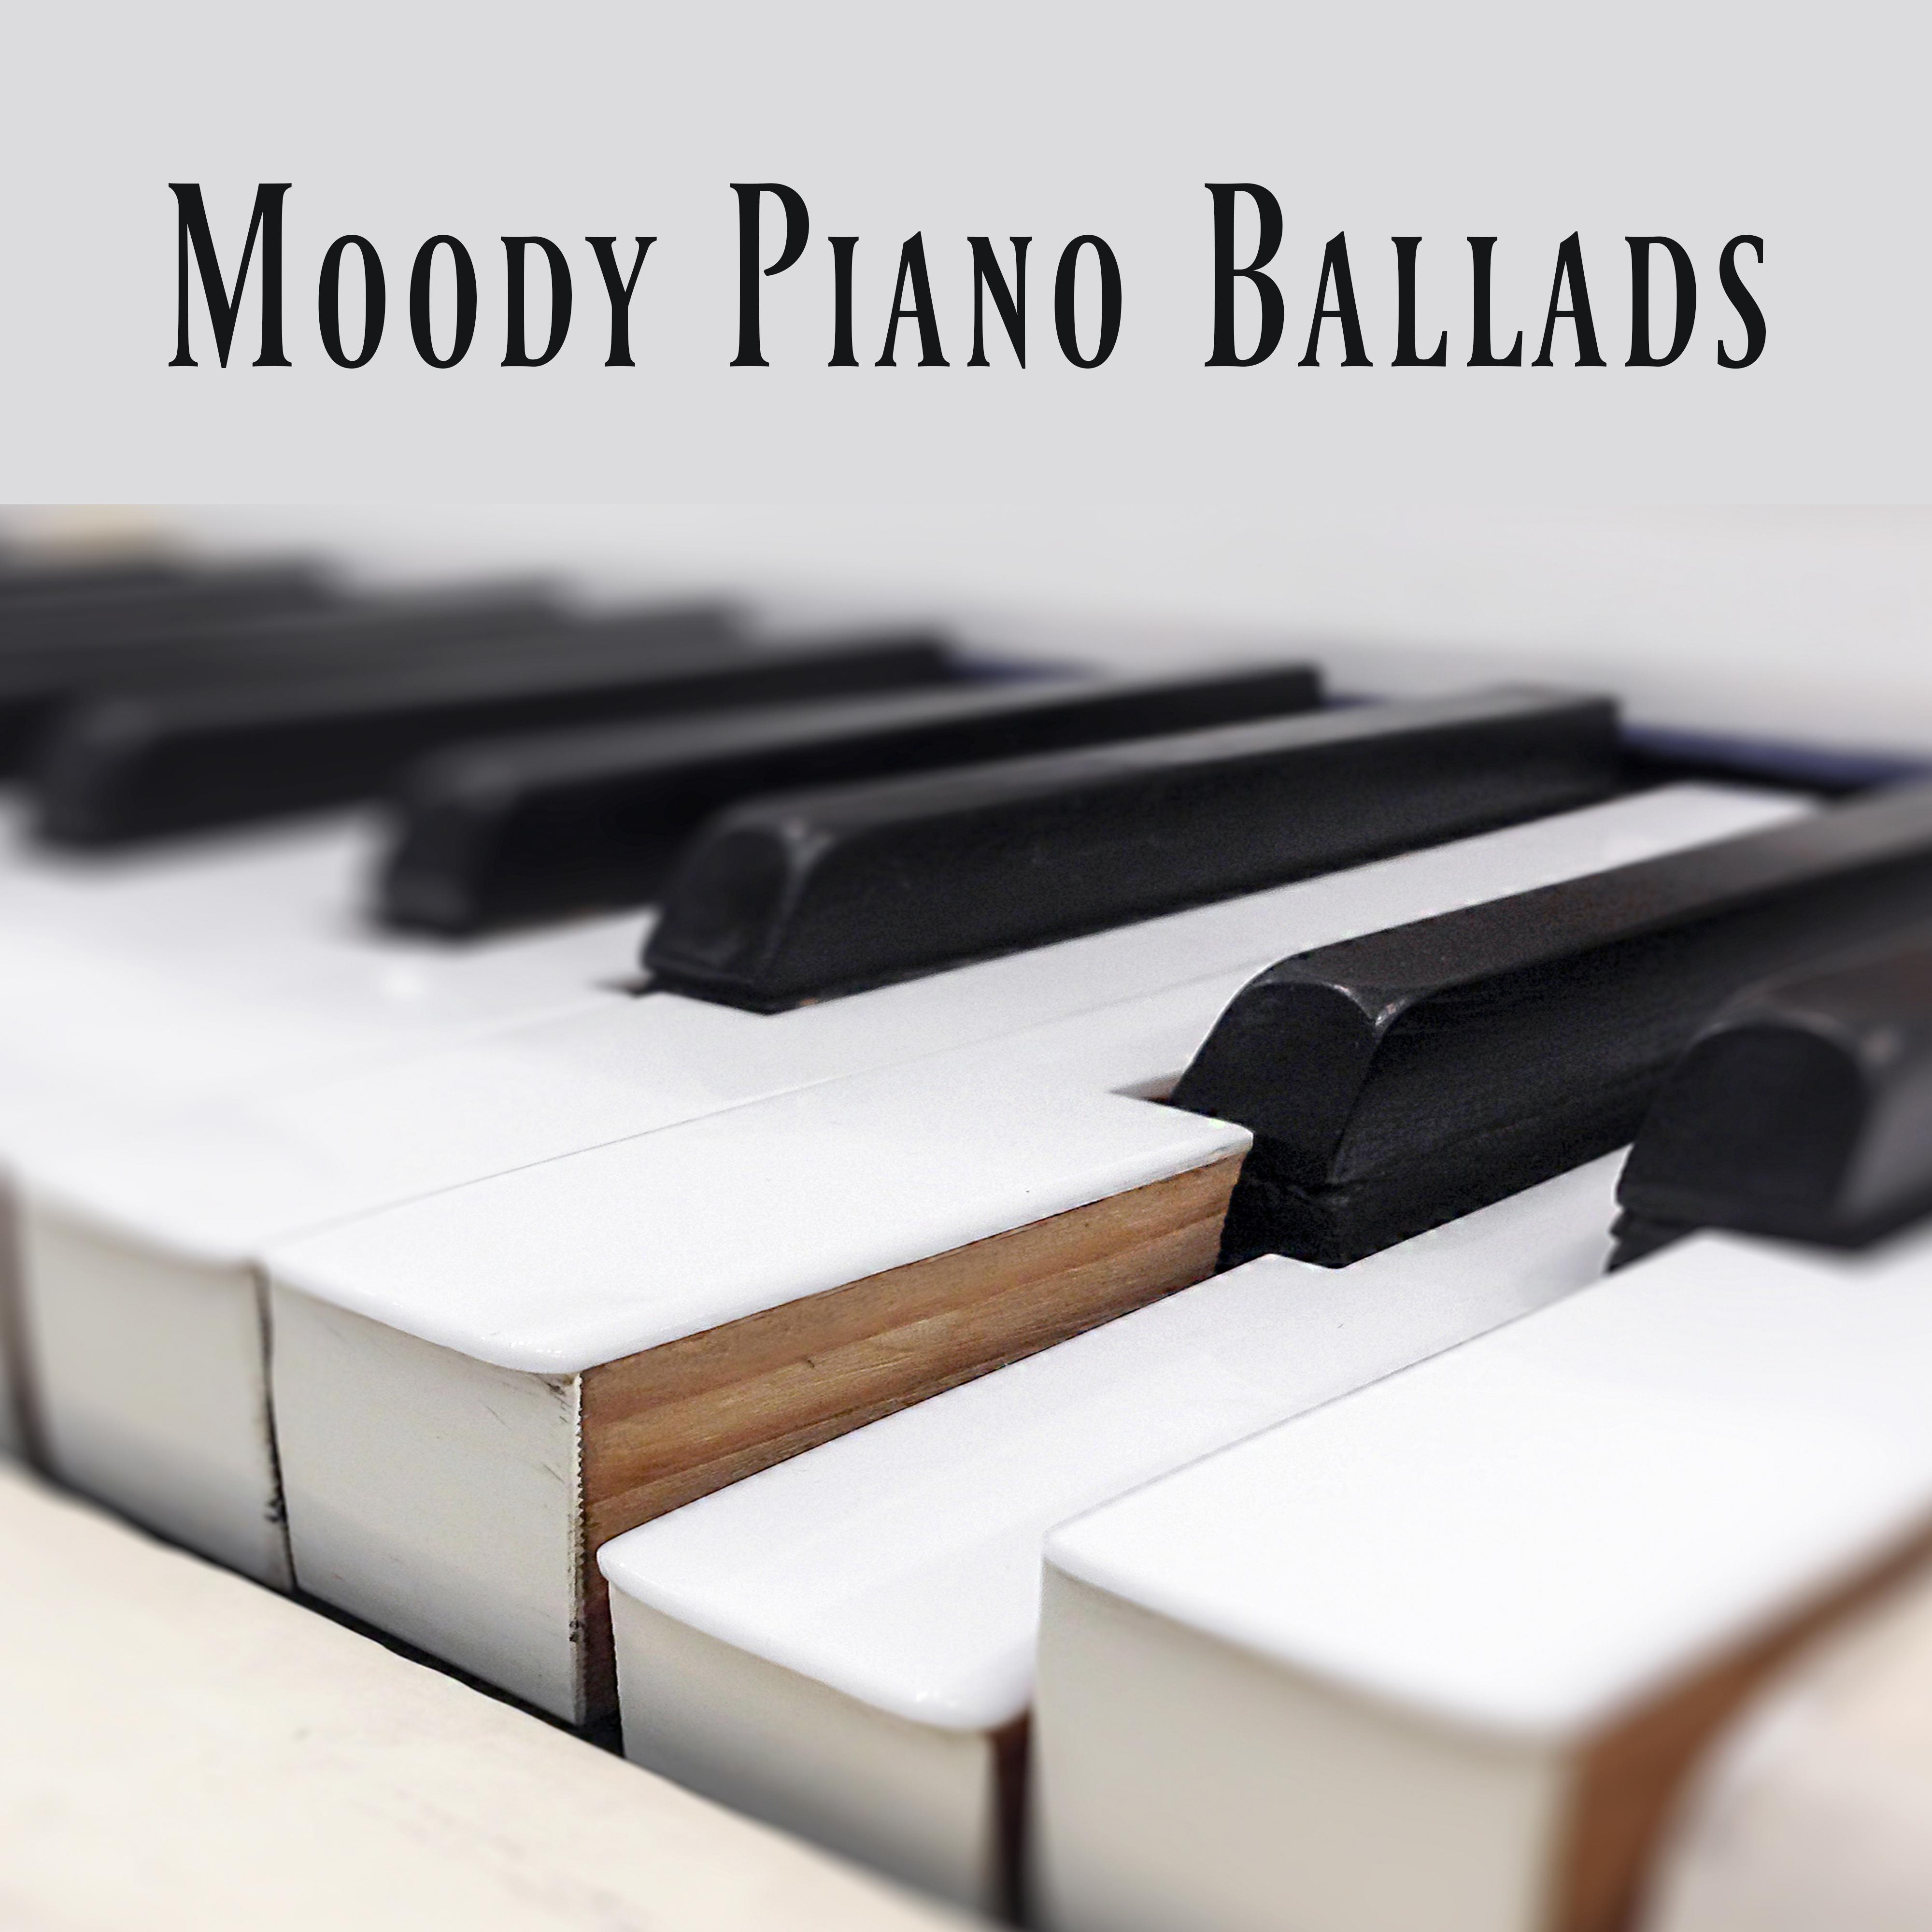 Moody Piano Ballads: Emotional Piano Music when You' re Depressed or Feel Bad  Deeply Relaxing, Pain Relieving and Calming Music